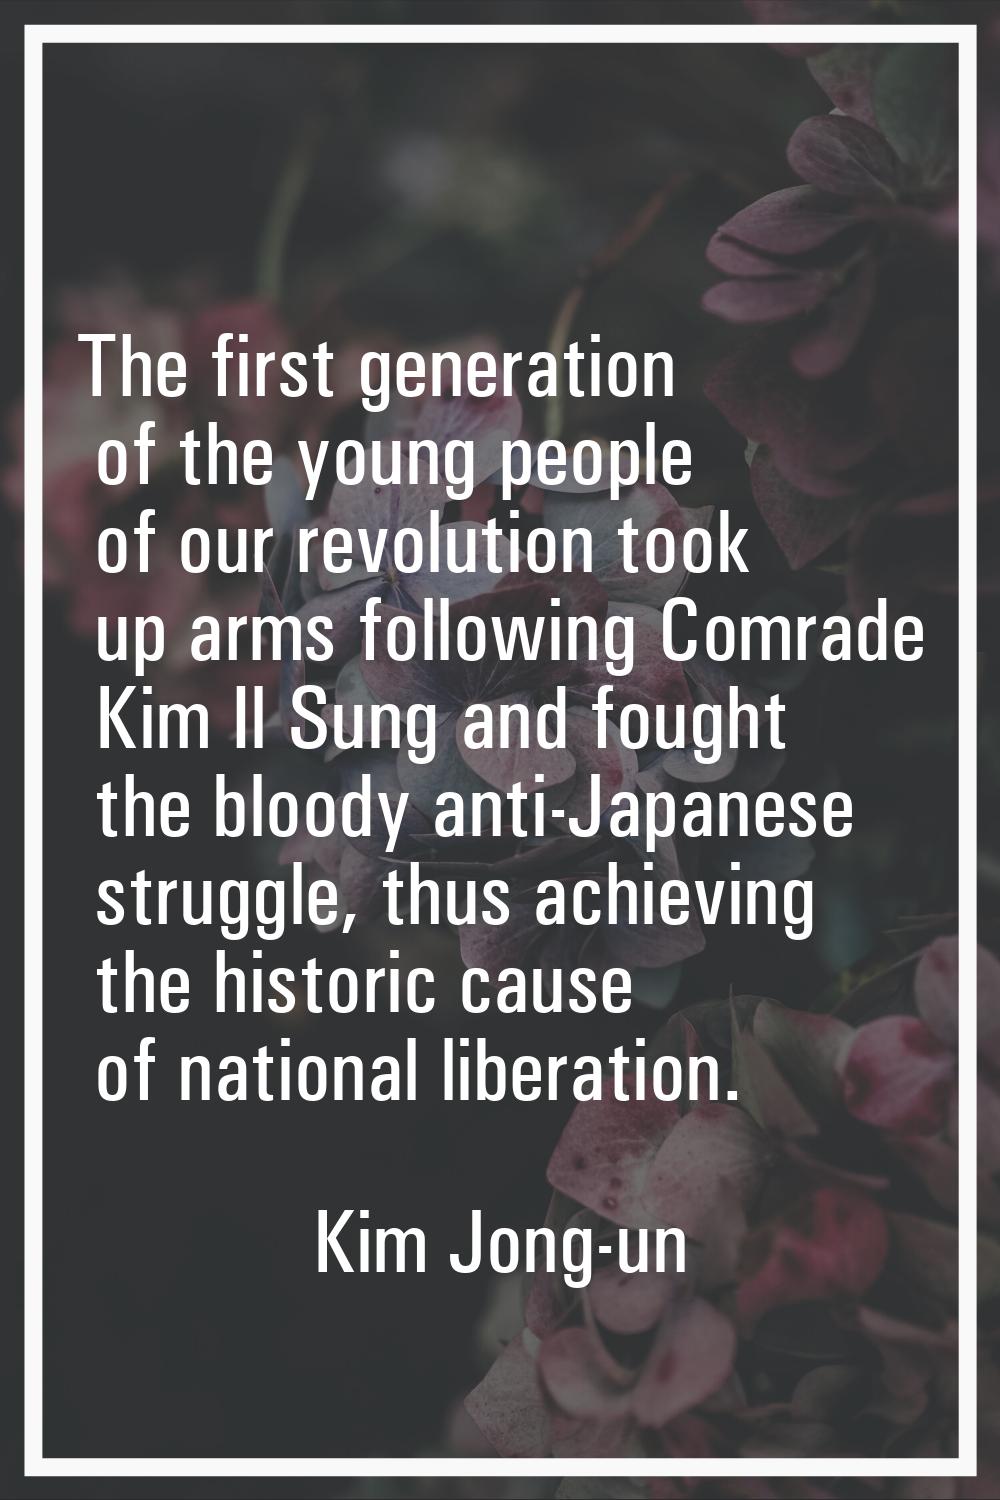 The first generation of the young people of our revolution took up arms following Comrade Kim Il Su